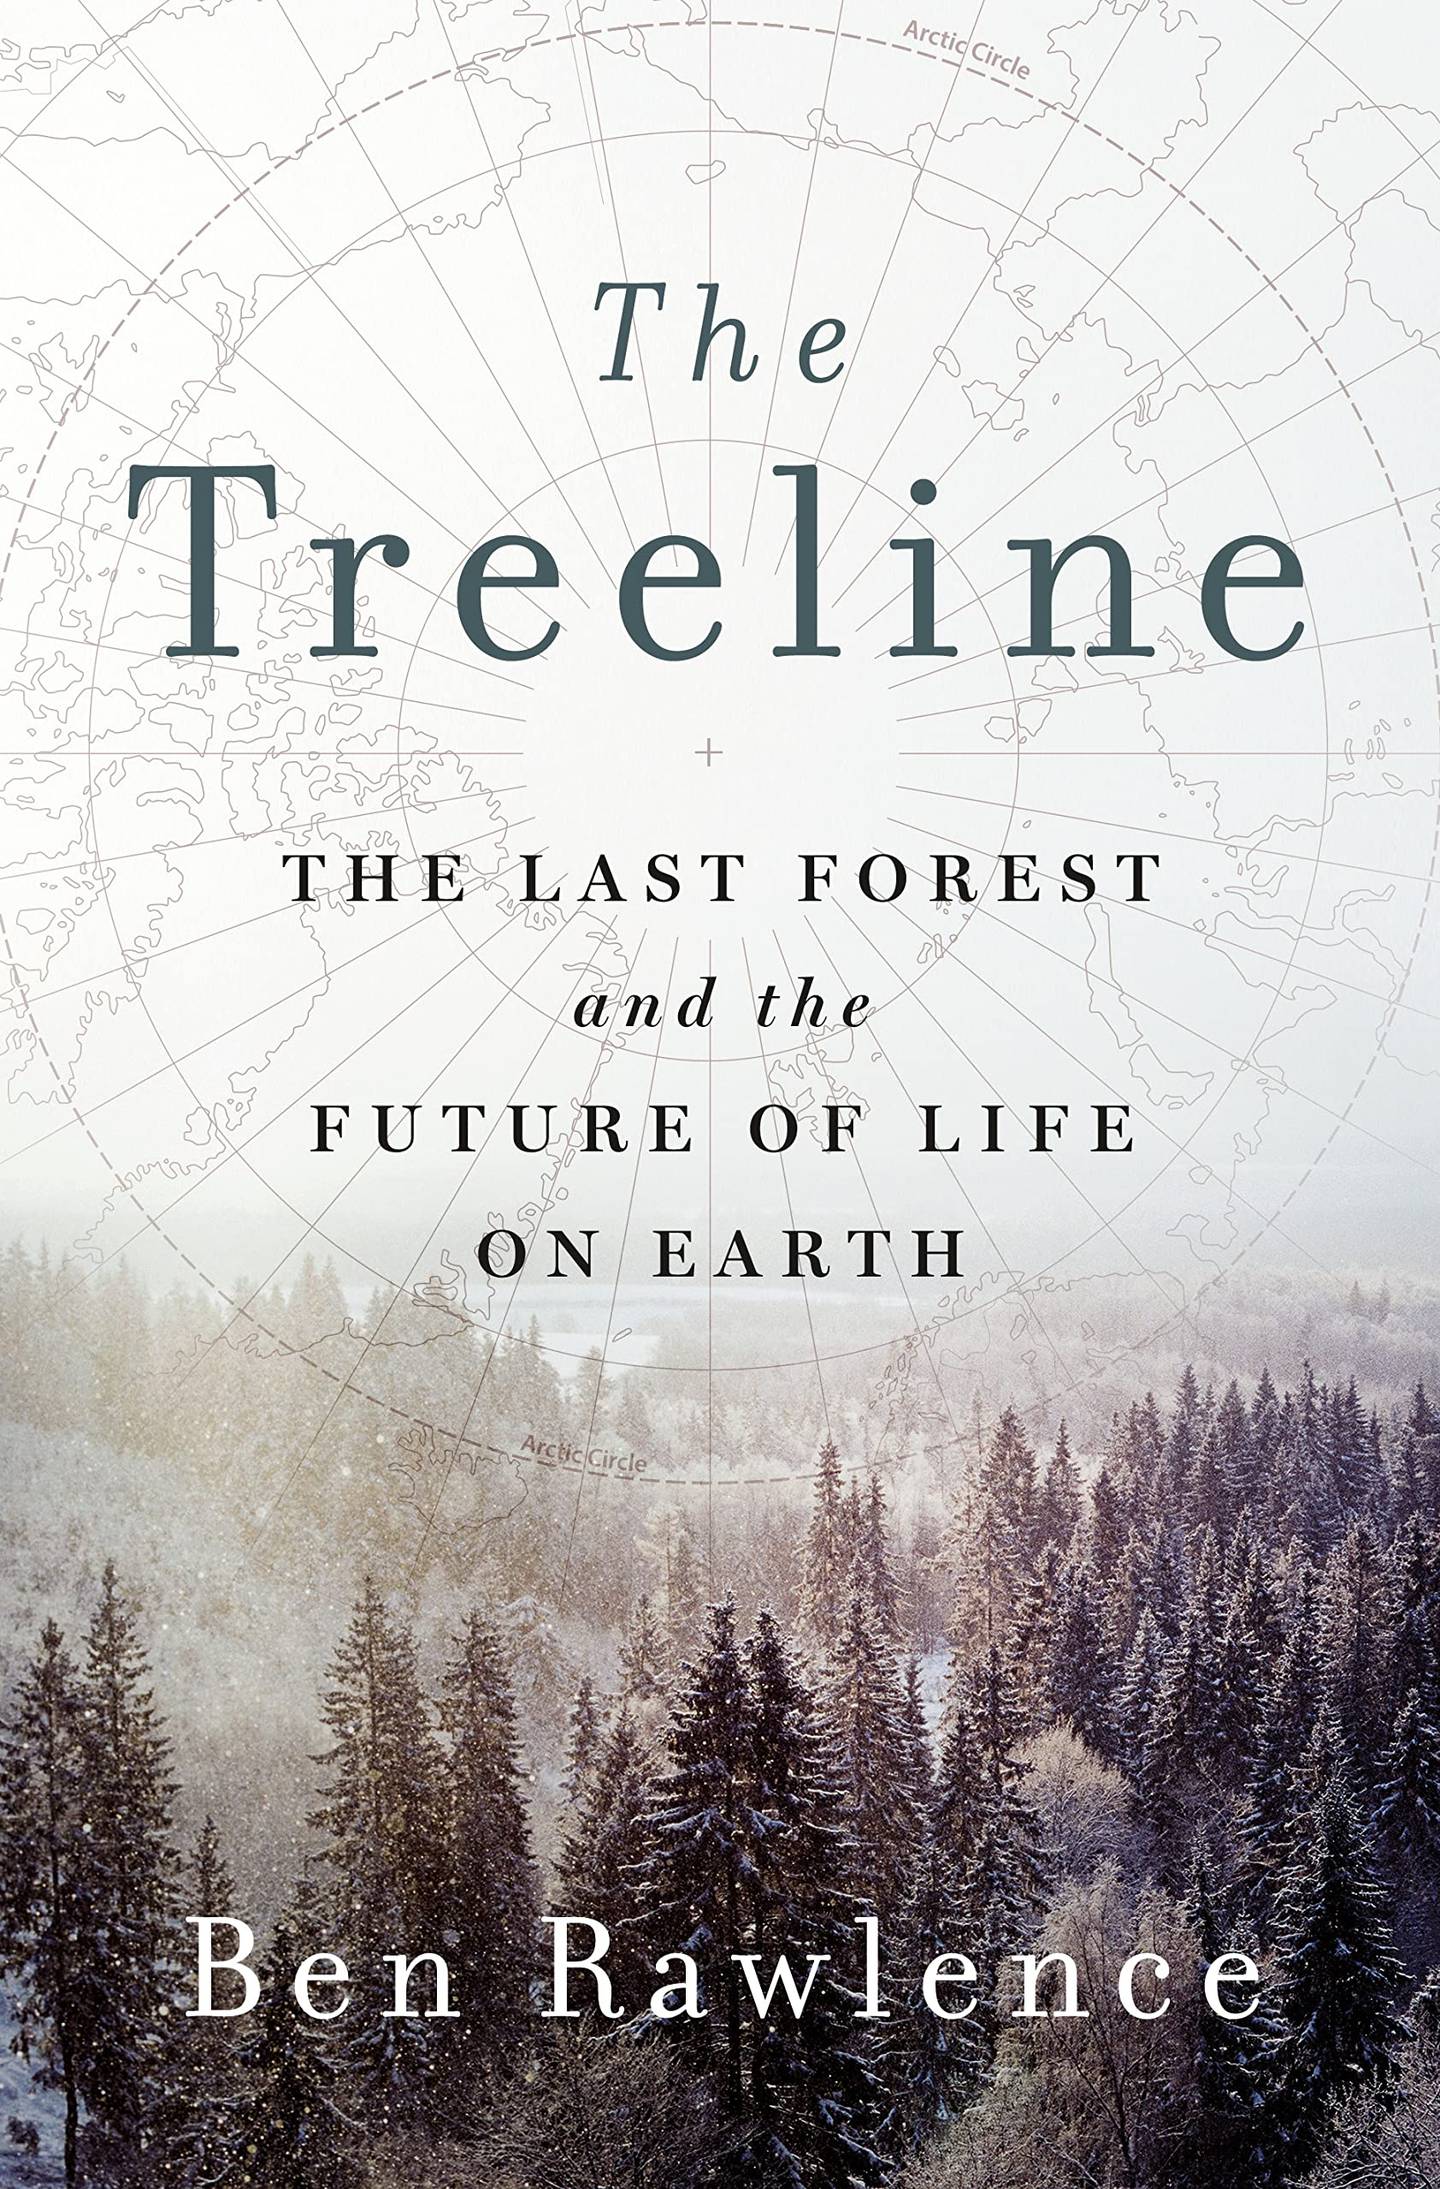 “The Treeline: The Last Forest and the Future of Life on Earth”